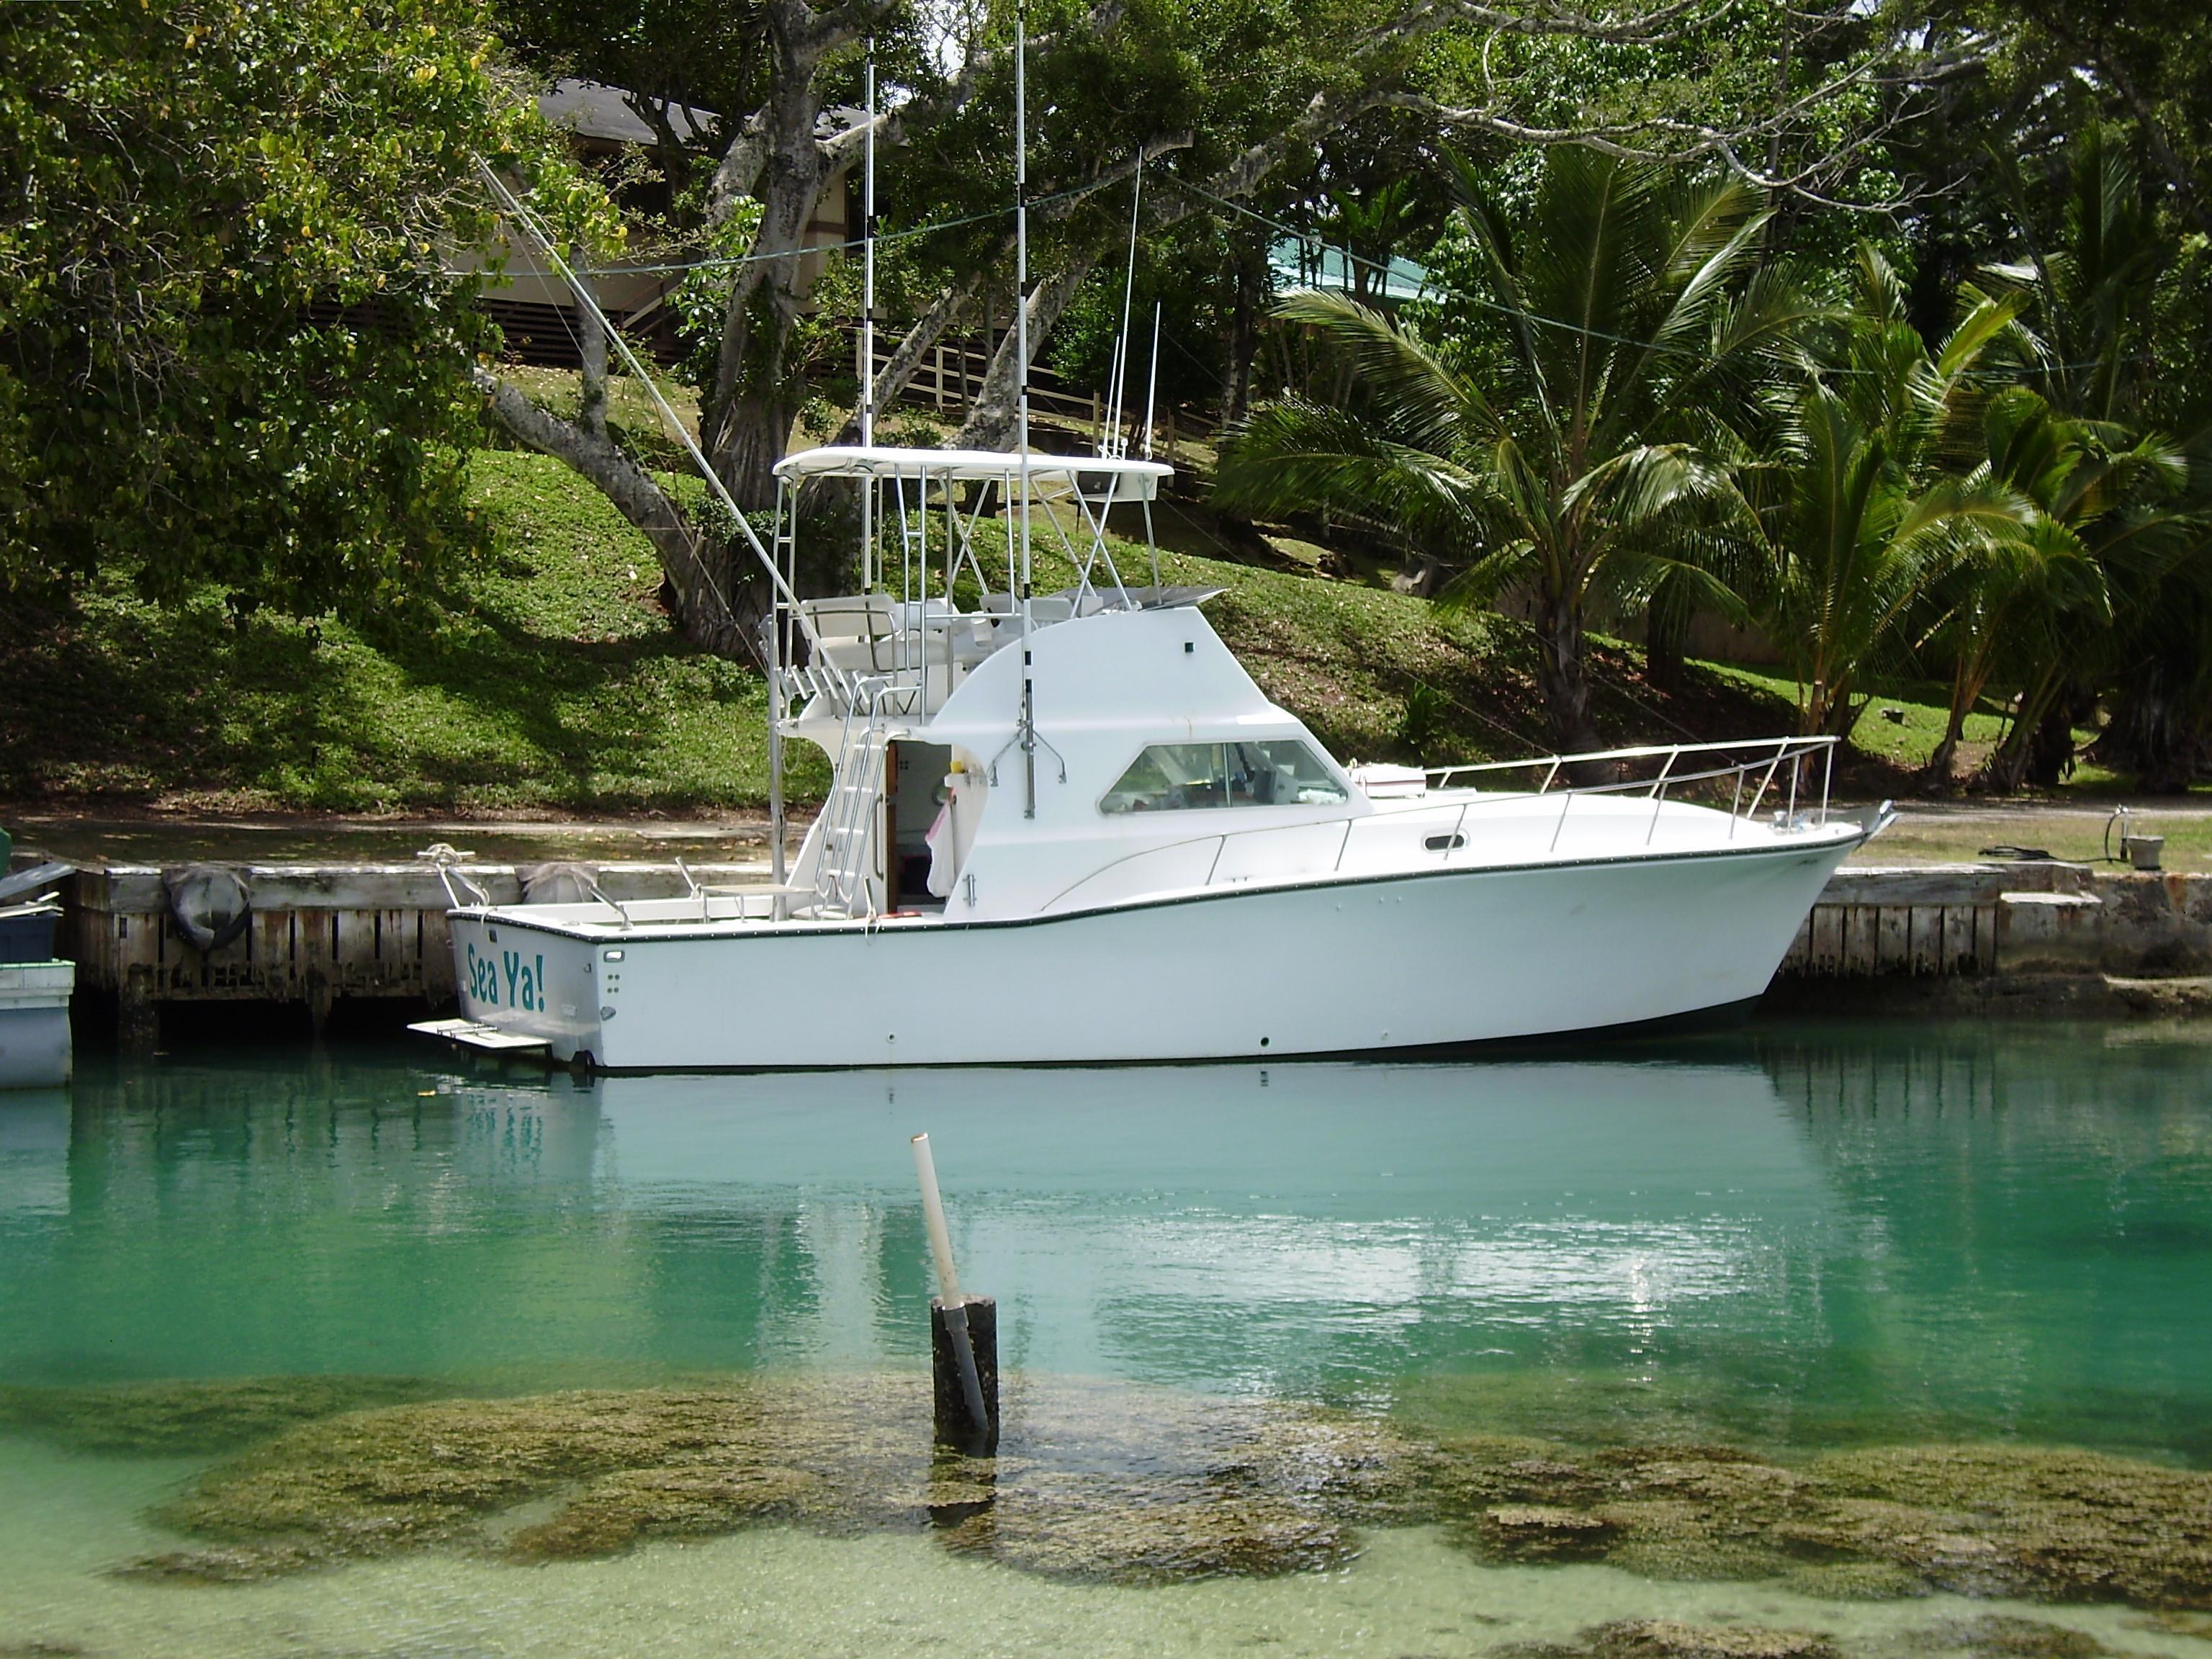 Pacemaker Sport Fisher, Kaneohe